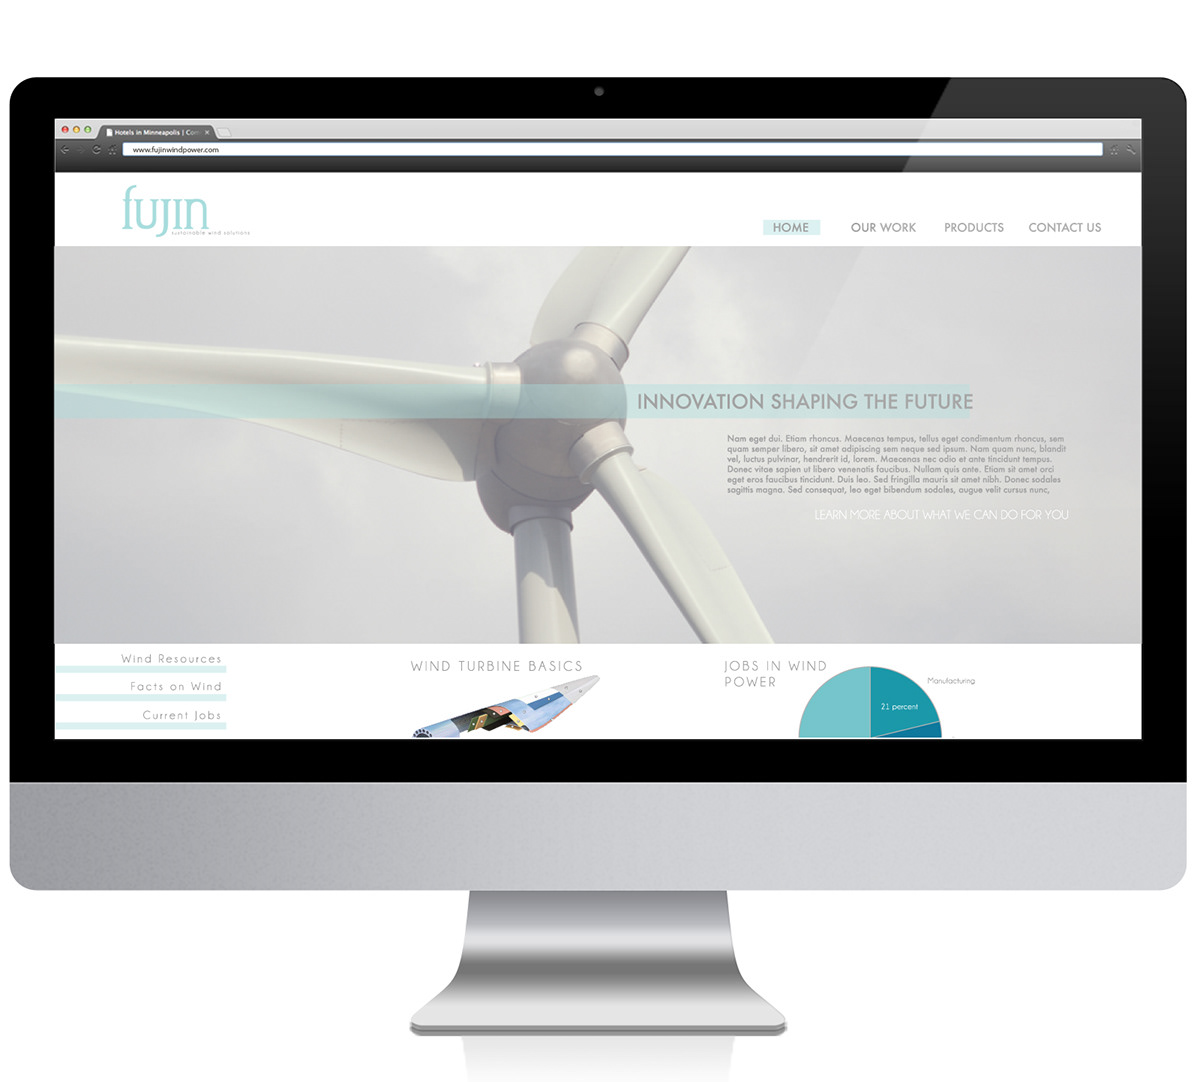 wind renewable Sustainable custom type Collateral Website identity brochure